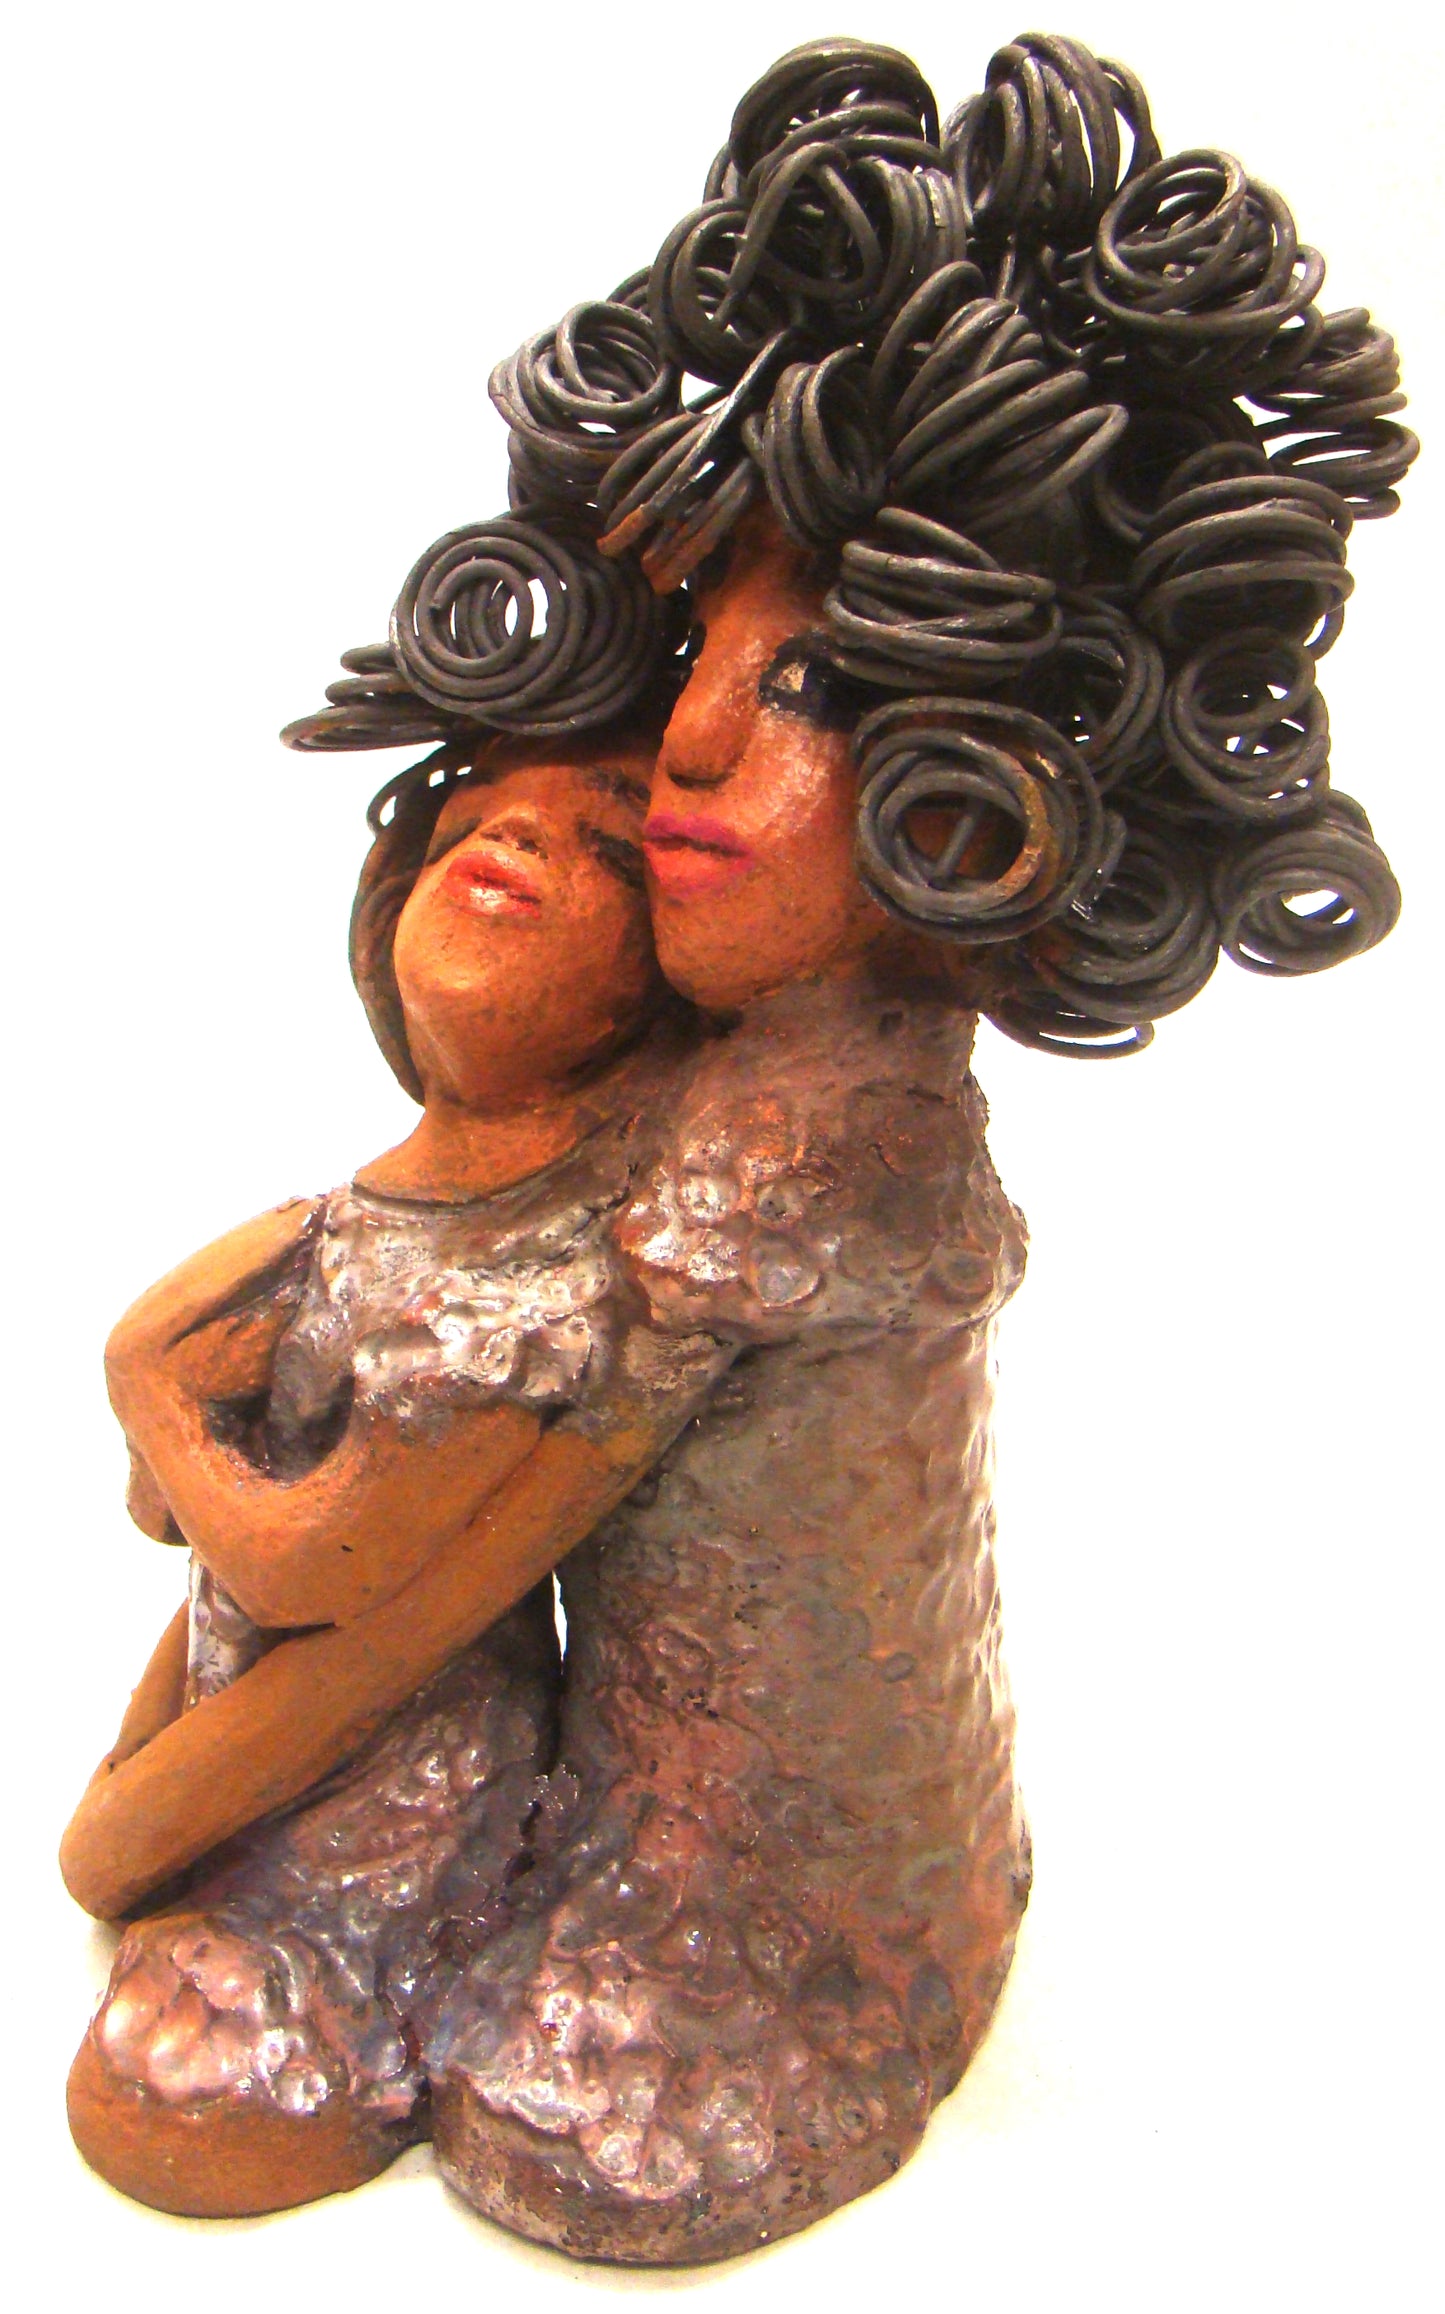 I Love You More stands 8.5 " x 4.5" x 4".5" and weighs 2.10 lbs. They have lovely honey brown complexions. Combined, I Love You More has over 25 feet of curly wire hair. They have glossy metallic copper dresses. They have long loving arms. One  is embracing the other. I Love You More! will  help illustrate the love that is in your home! Free Shipping!